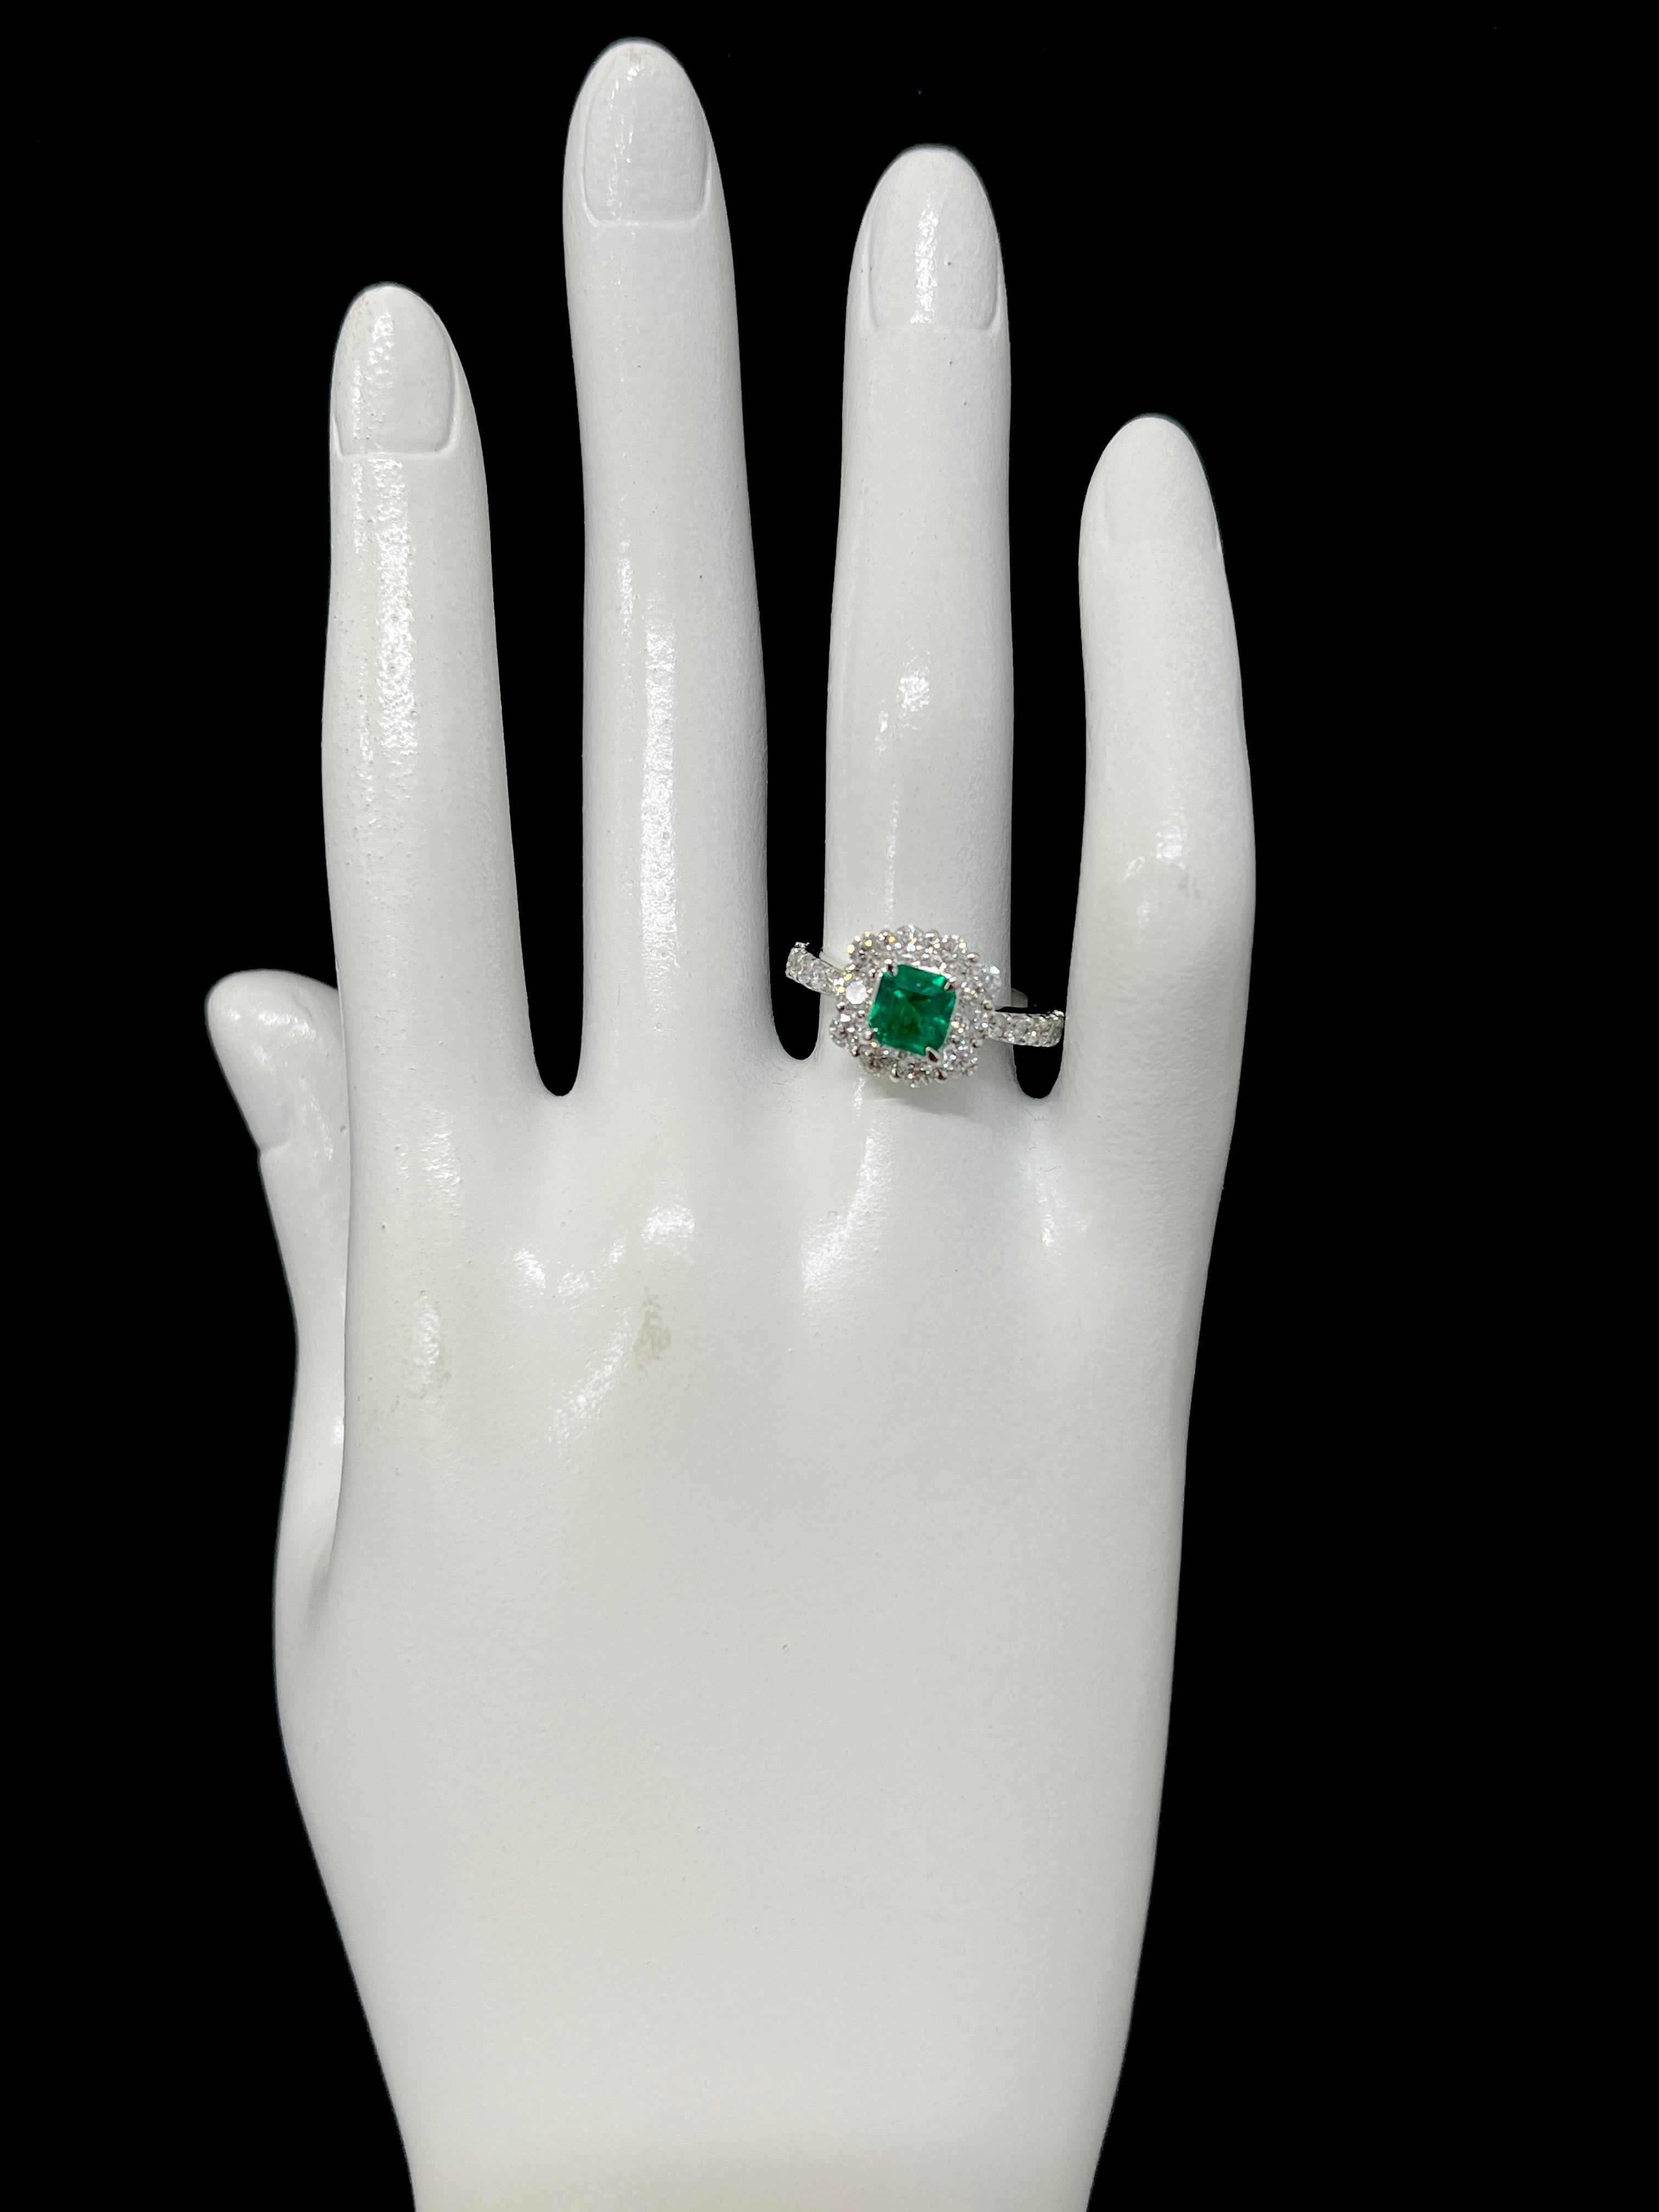 0.91 Carat Natural Colombian Emerald and Diamond Ring Made in Platinum For Sale 1